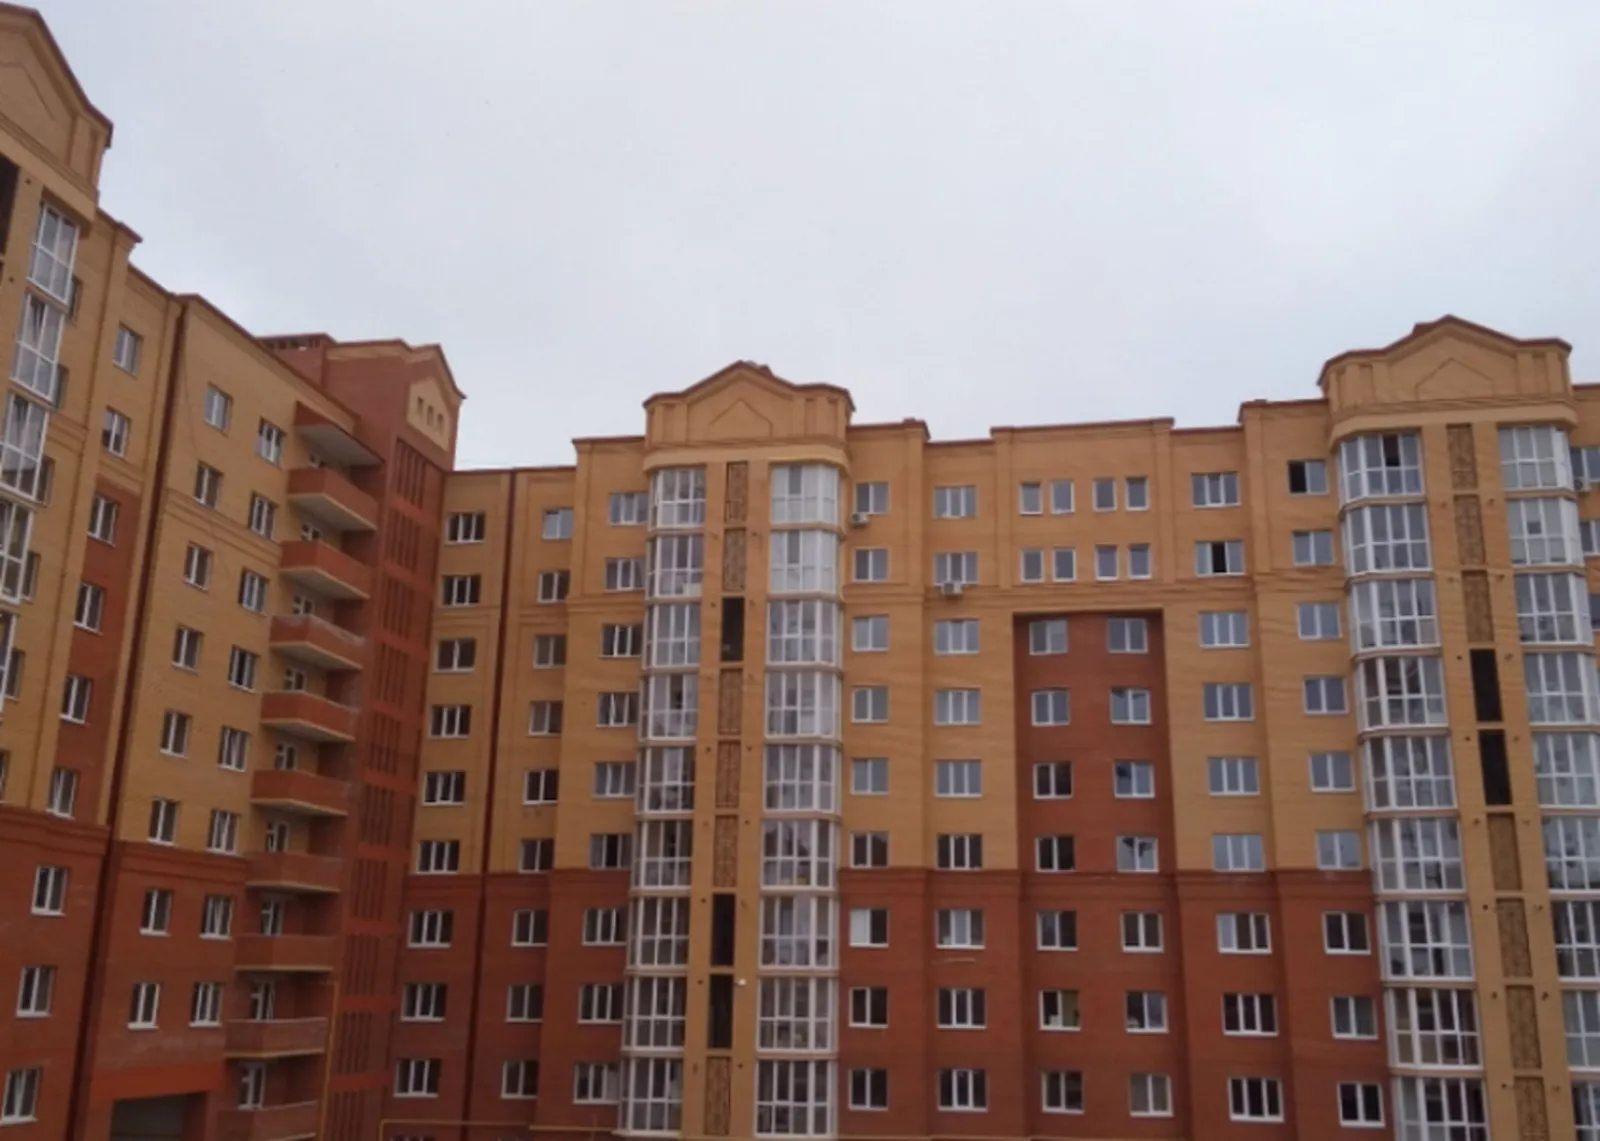 Apartments for sale. 2 rooms, 67 m², 1st floor/9 floors. Bam, Ternopil. 